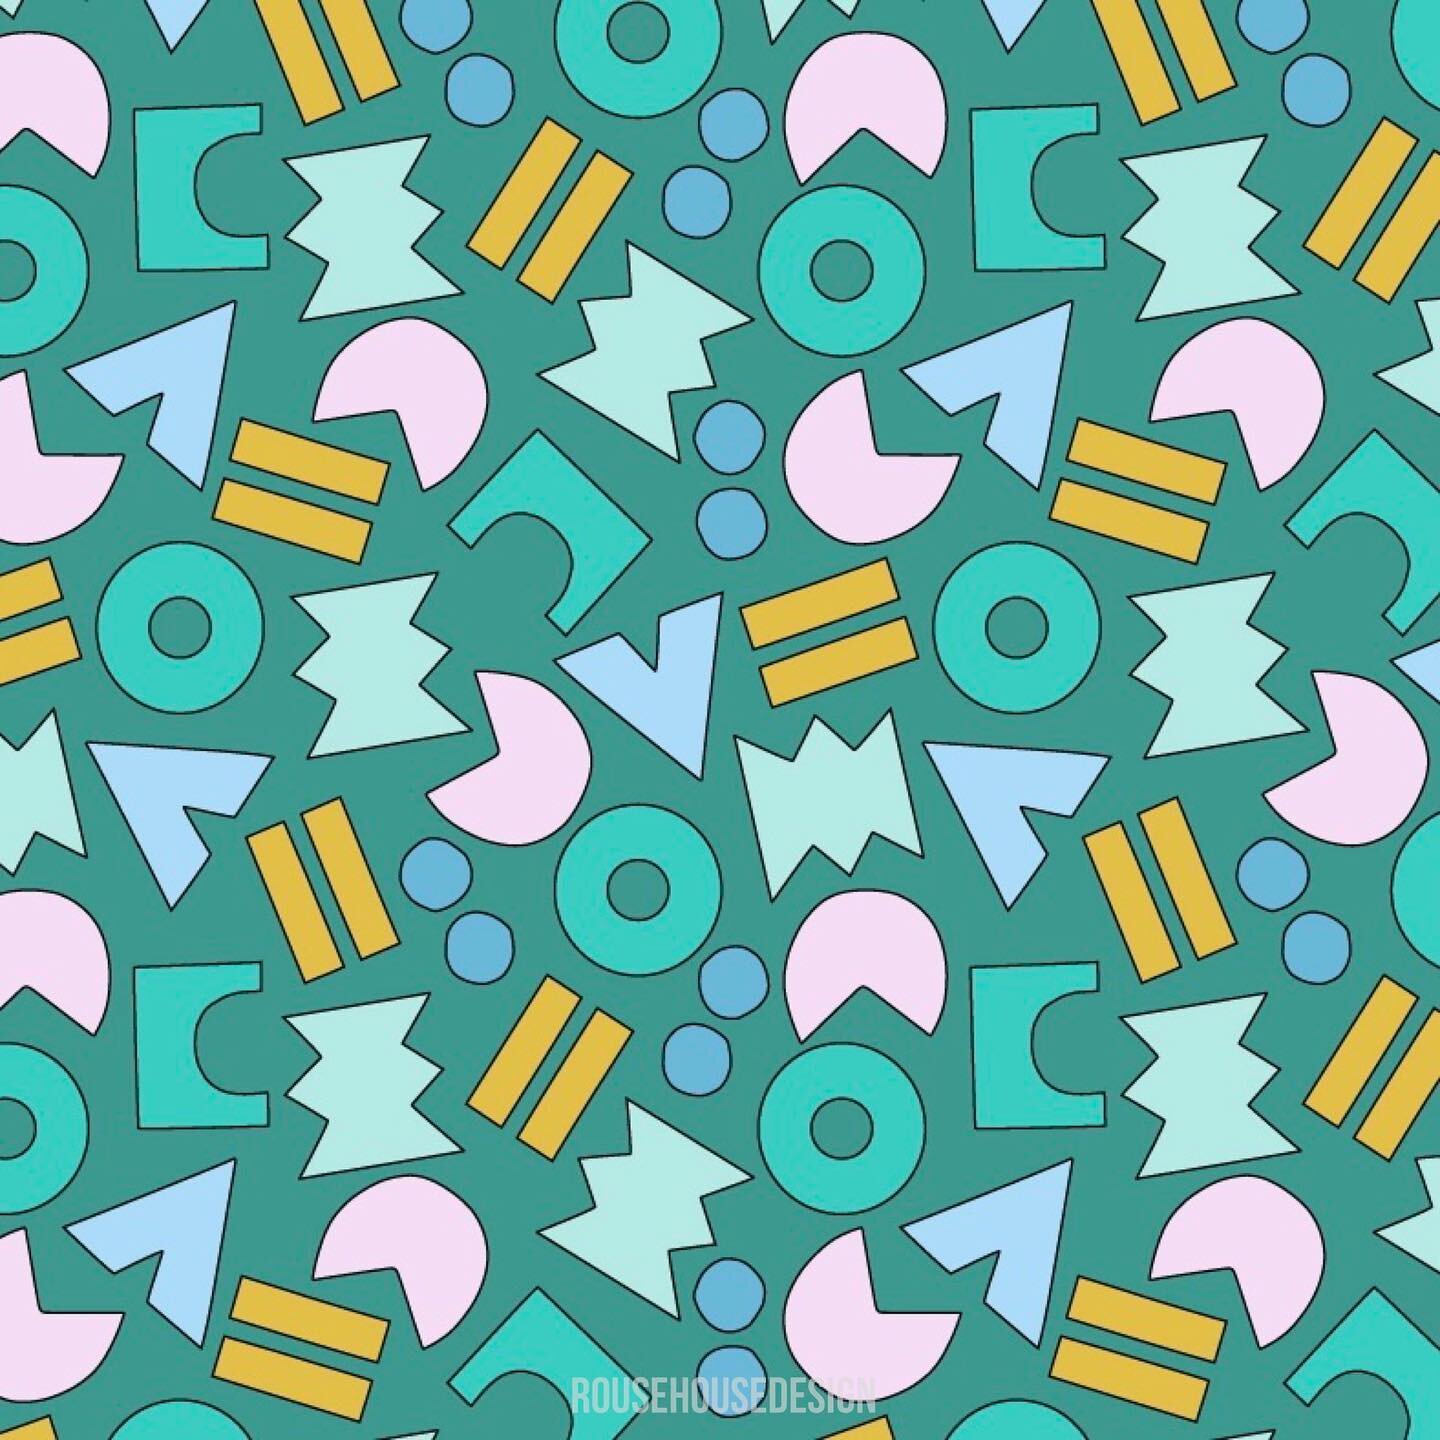 A toss repeat of some of my cut out shapes. Confetti is always a good time 😎 #playfulpatterns #printandpatternblog #rousehousedesign #surfacedesign #artlicensing #artforproducts #coolcolors #repeatingpattern #patternlovers #patterndesigncommunity